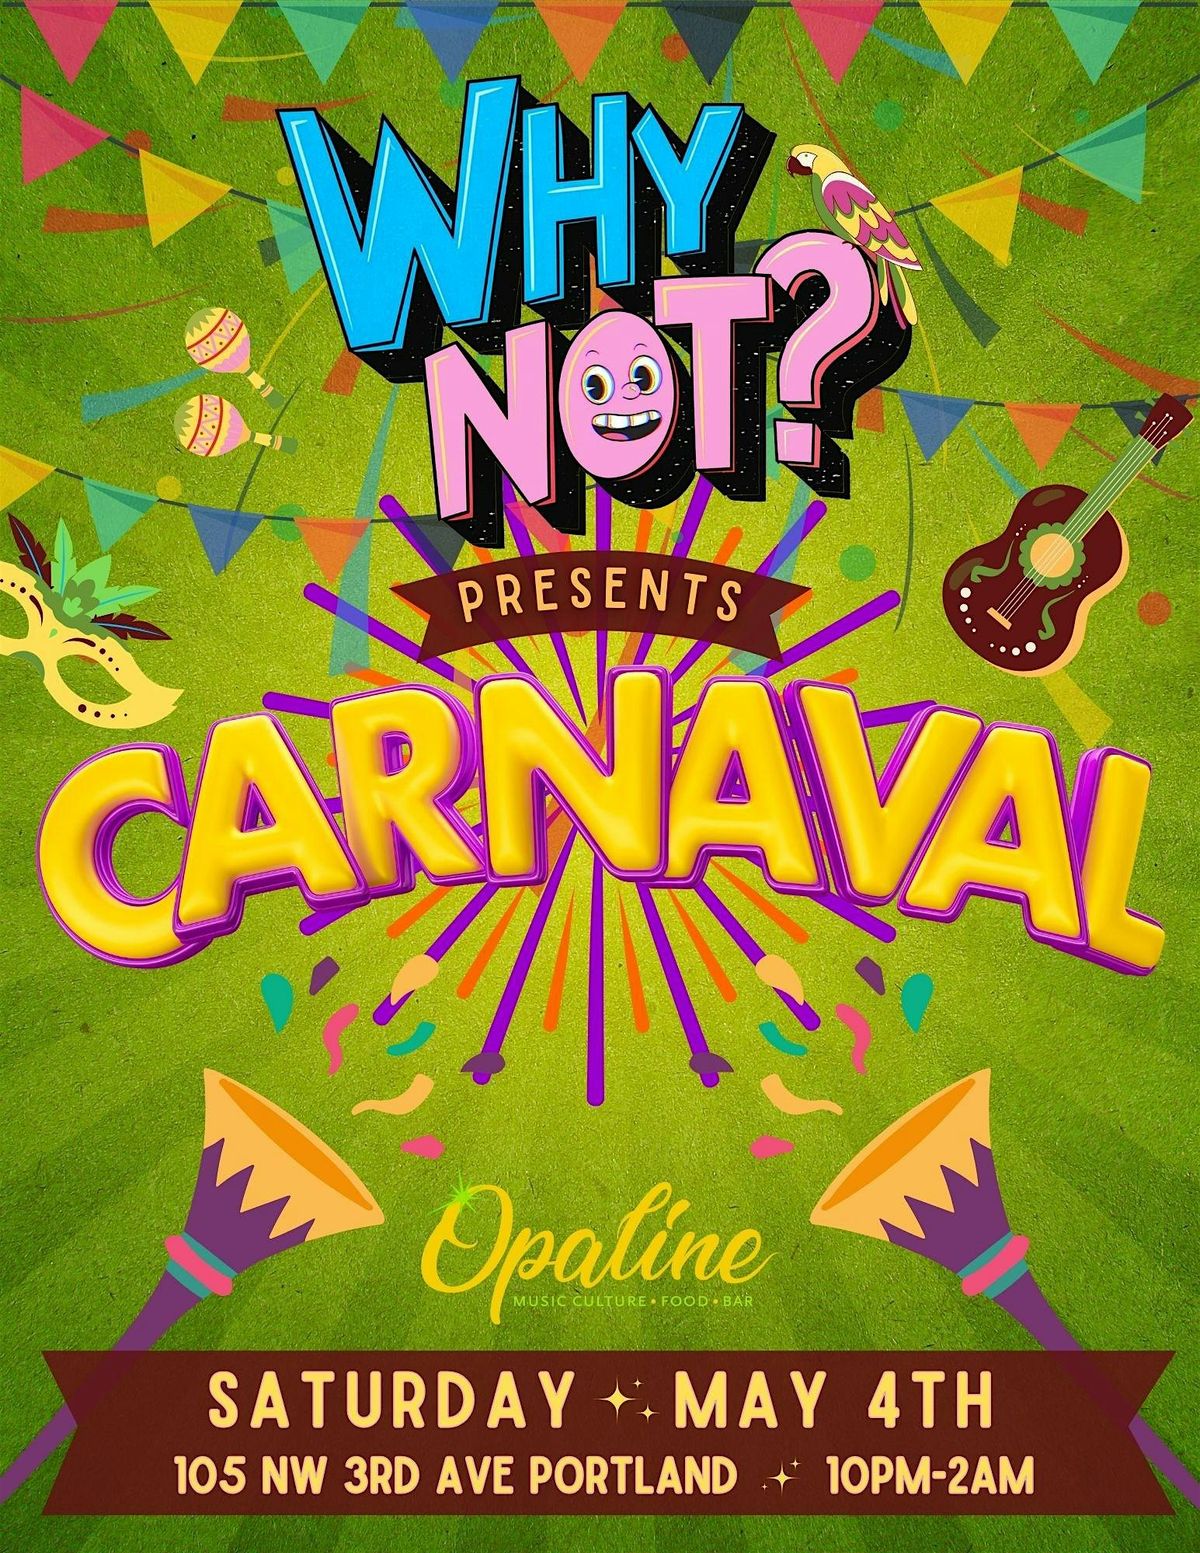 WHYNOT Presents: CARNAVAL